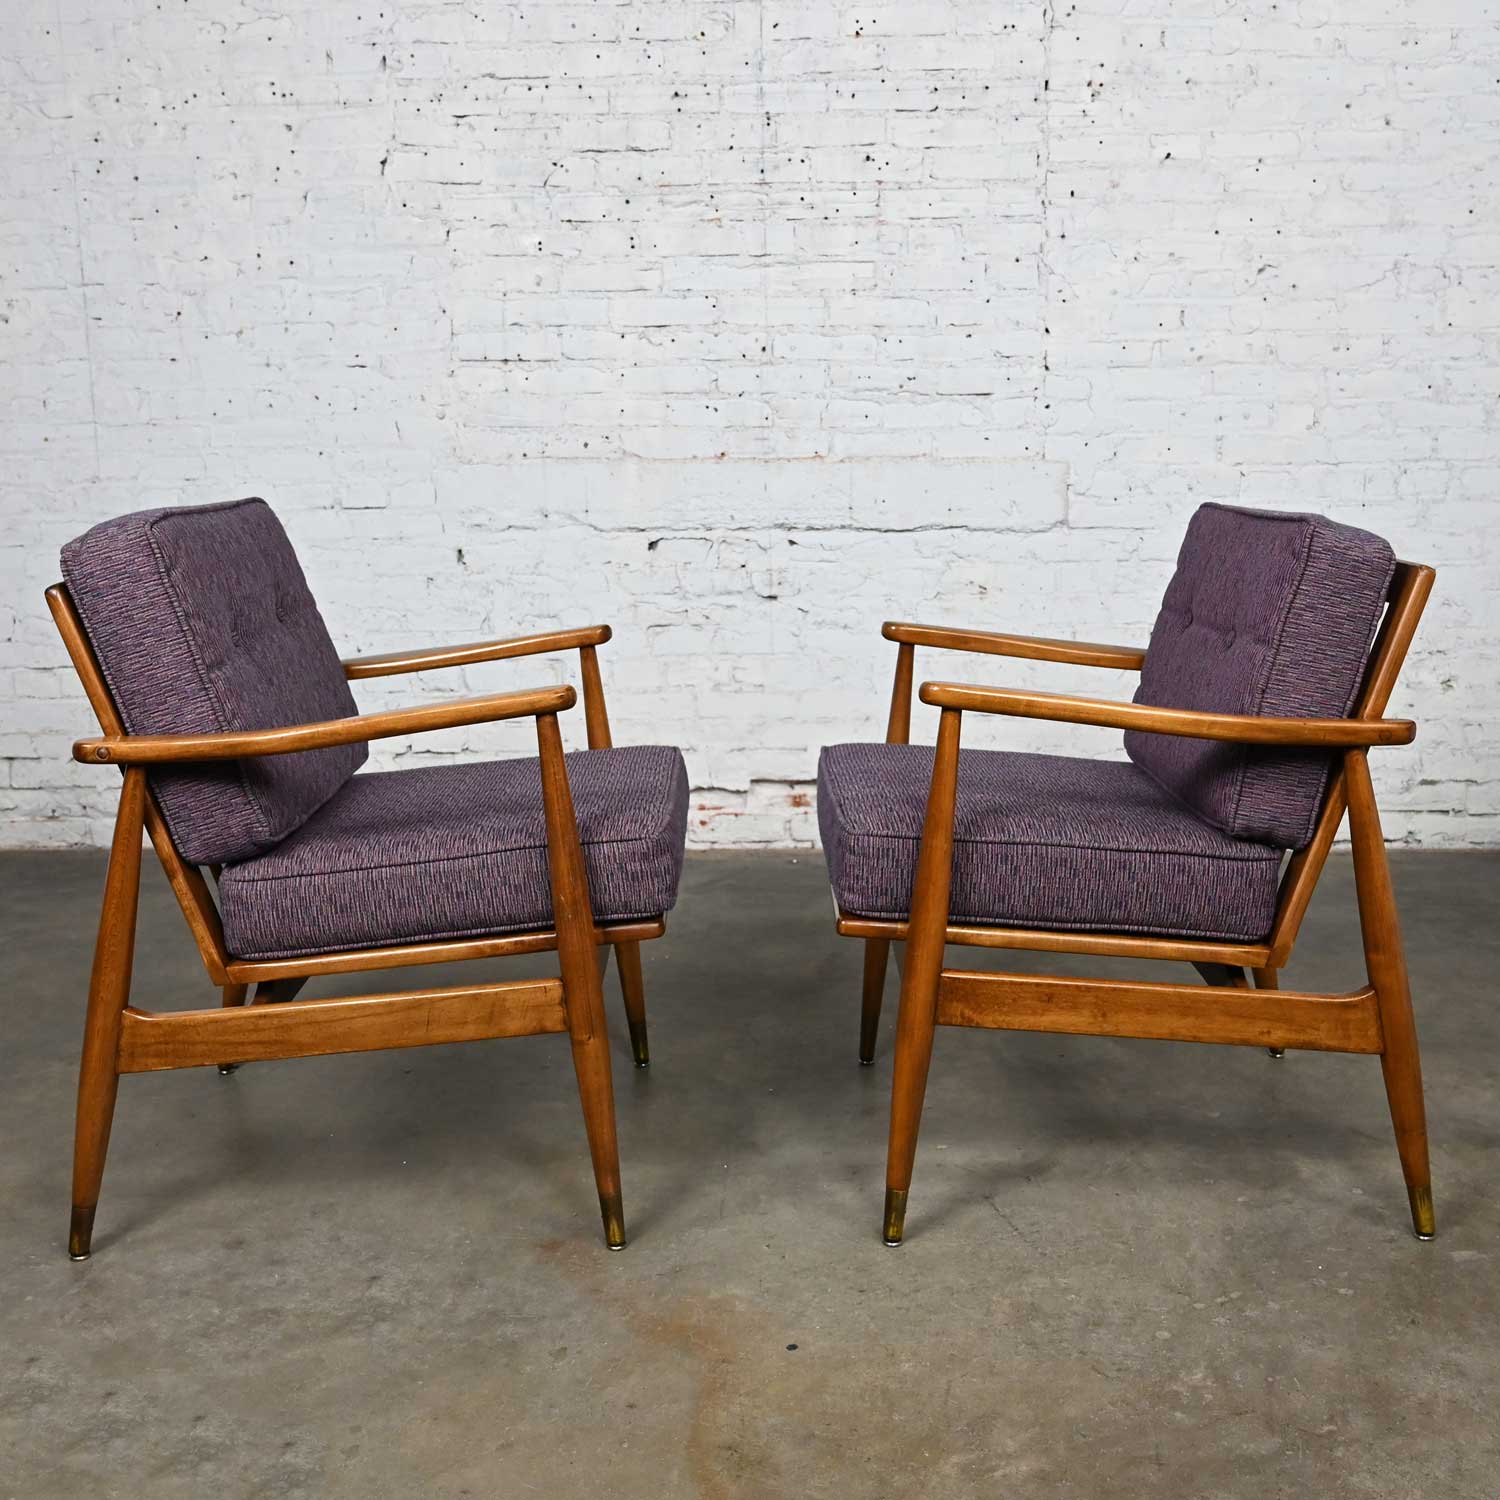 Mid-20th Century Modern Arm Lounge Chairs Tapered Legs & Brass Sabots Style of Folke Ohlsson for DUX